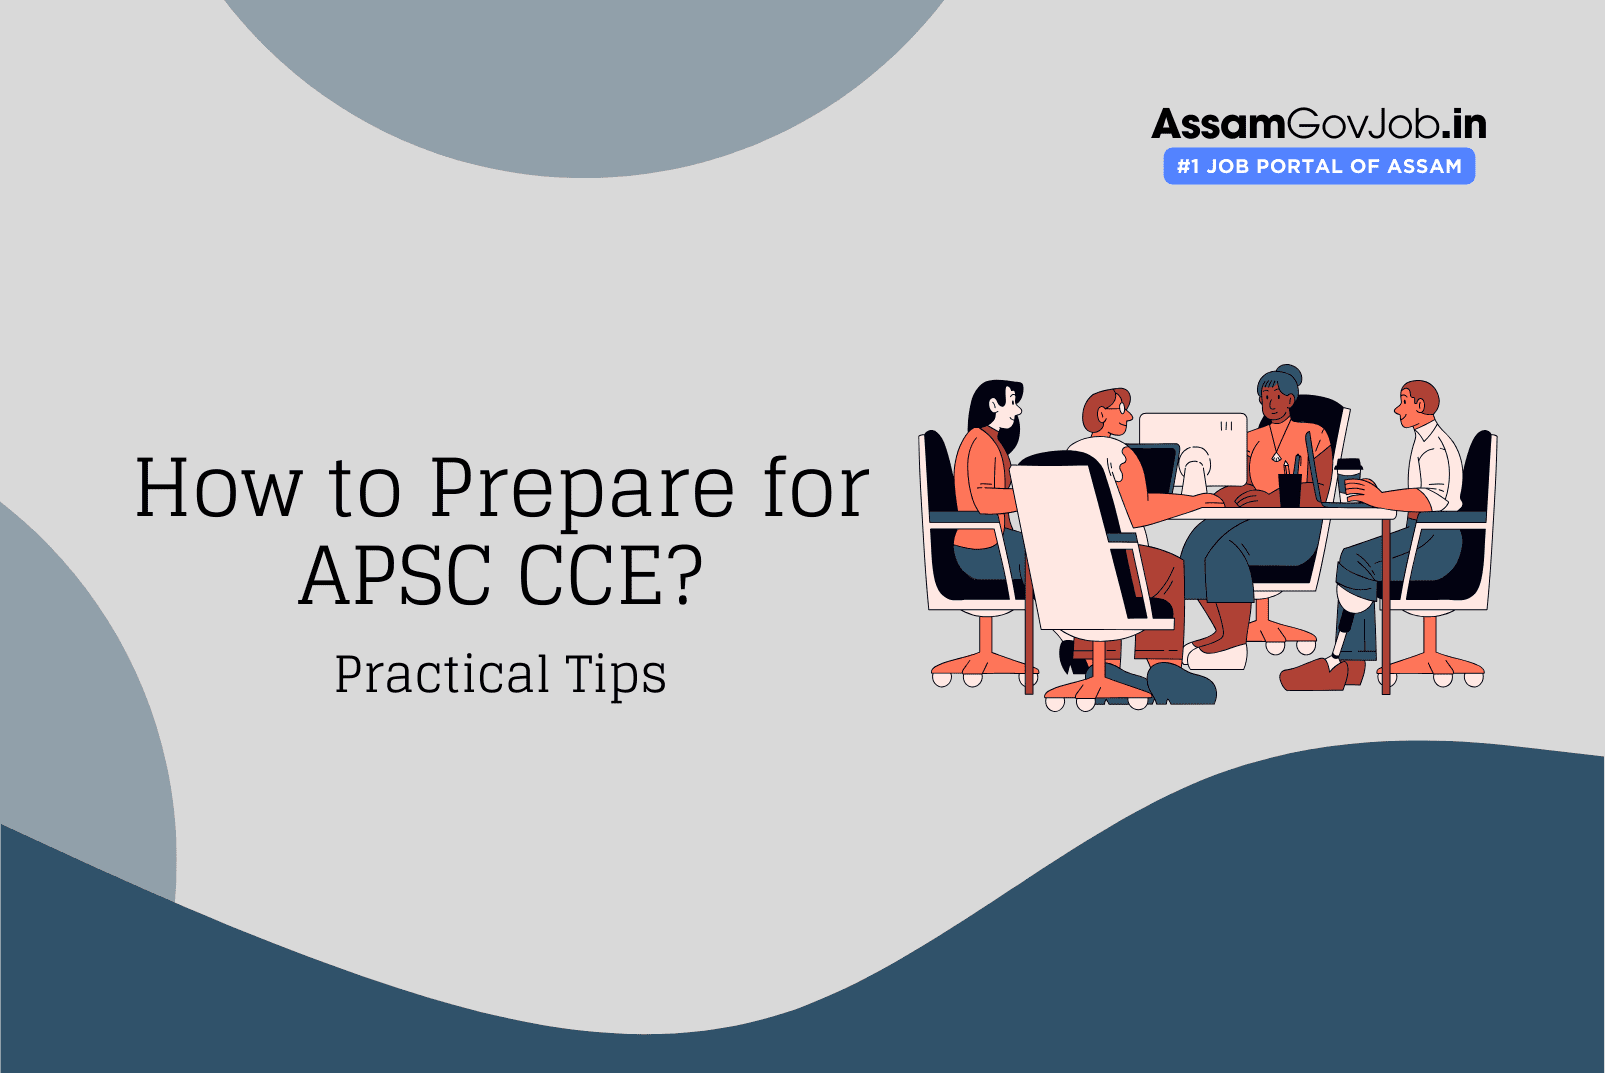 How to Prepare for APSC CCE